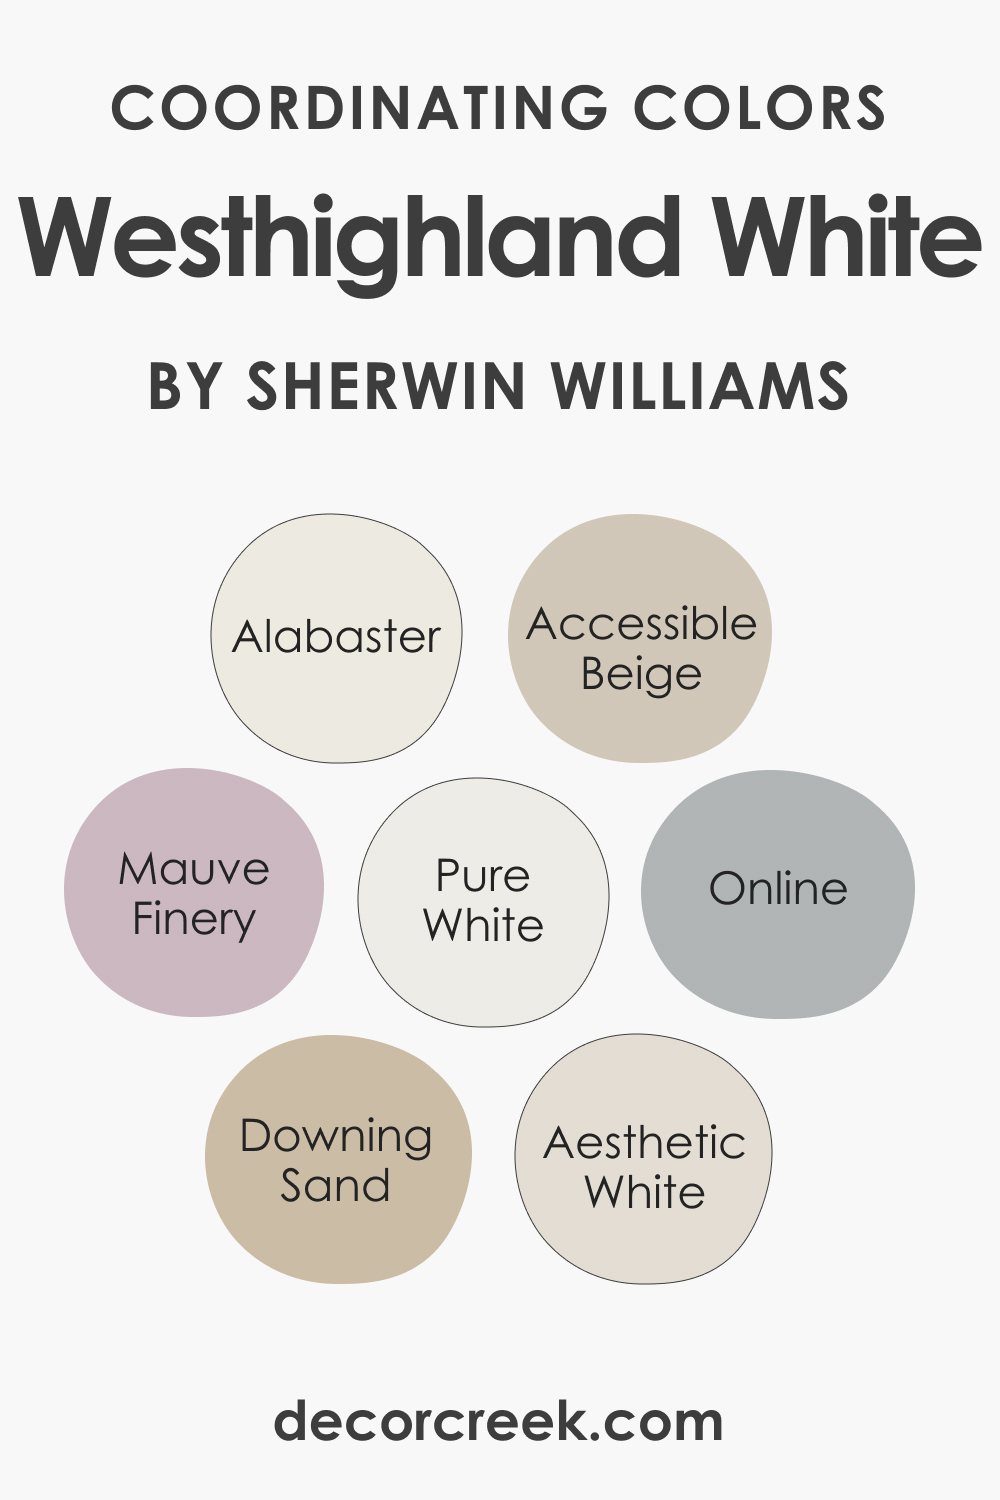 Coordinating Colors of SW 7566 Westhighland White